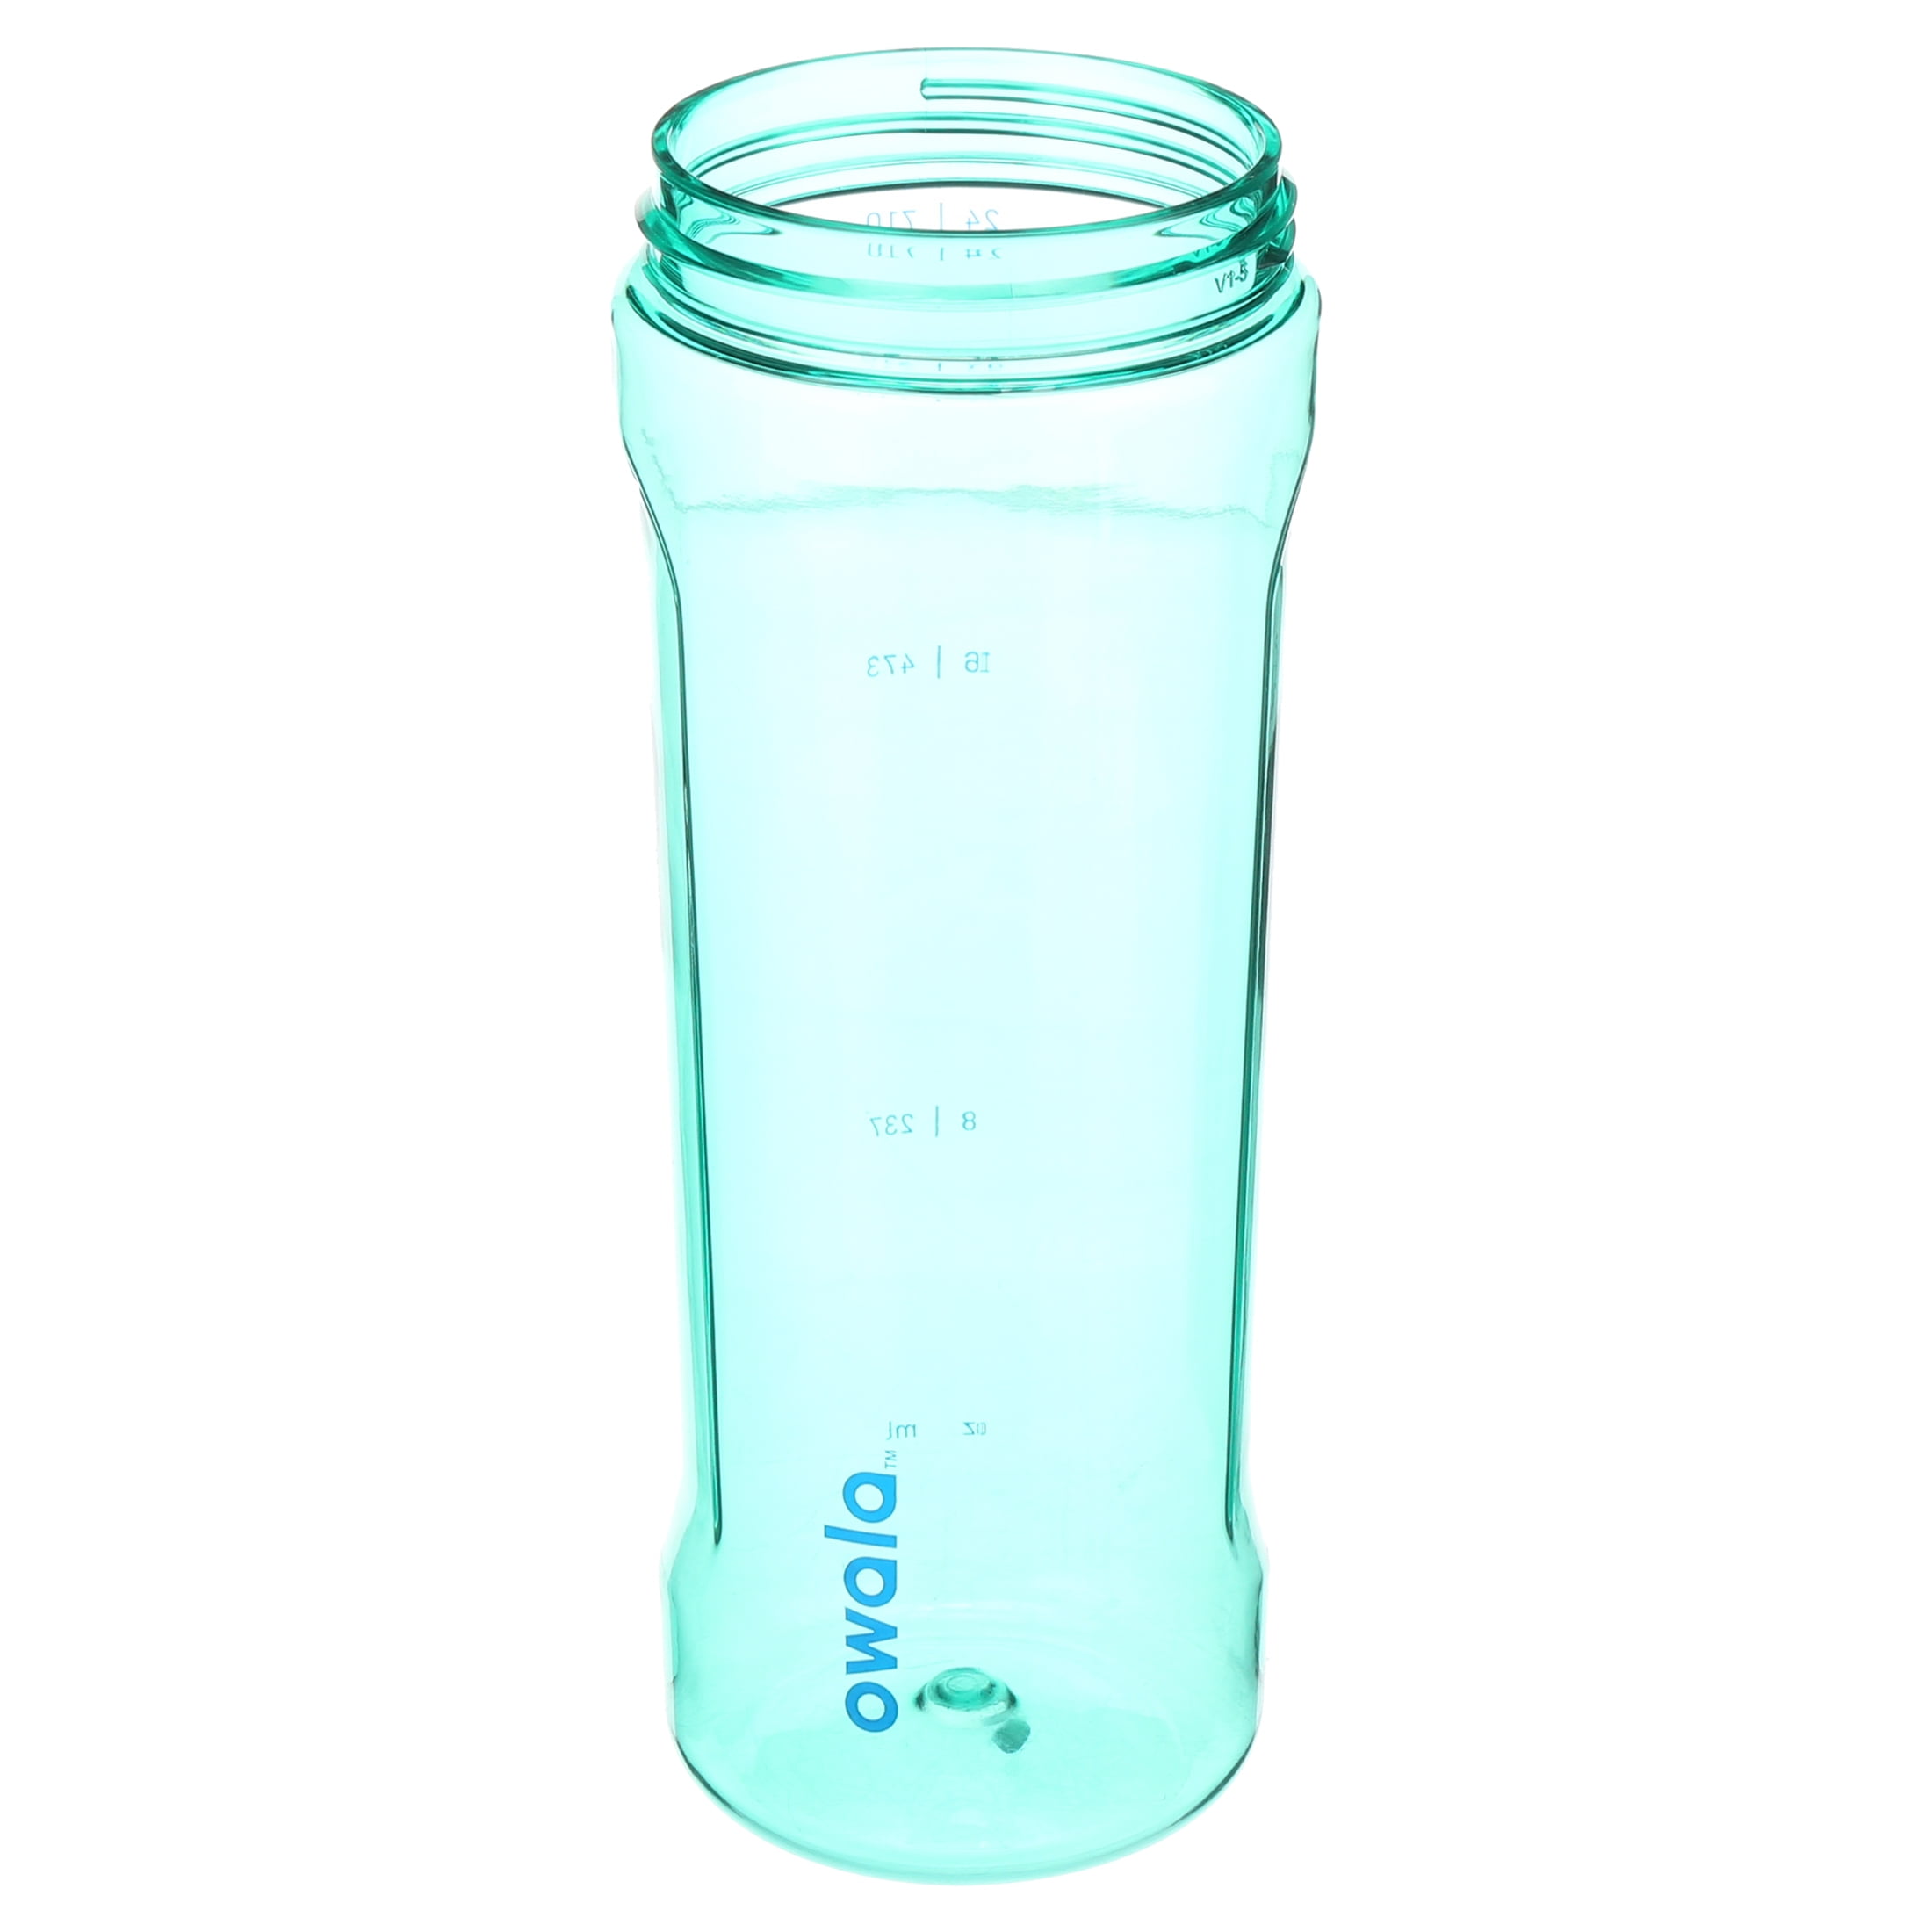 Owala Flip Clear Water Bottle with Straw and Locking Lid for Sports and  Travel, BPA-Free, 25-Ounce, Smooshed Blueberry